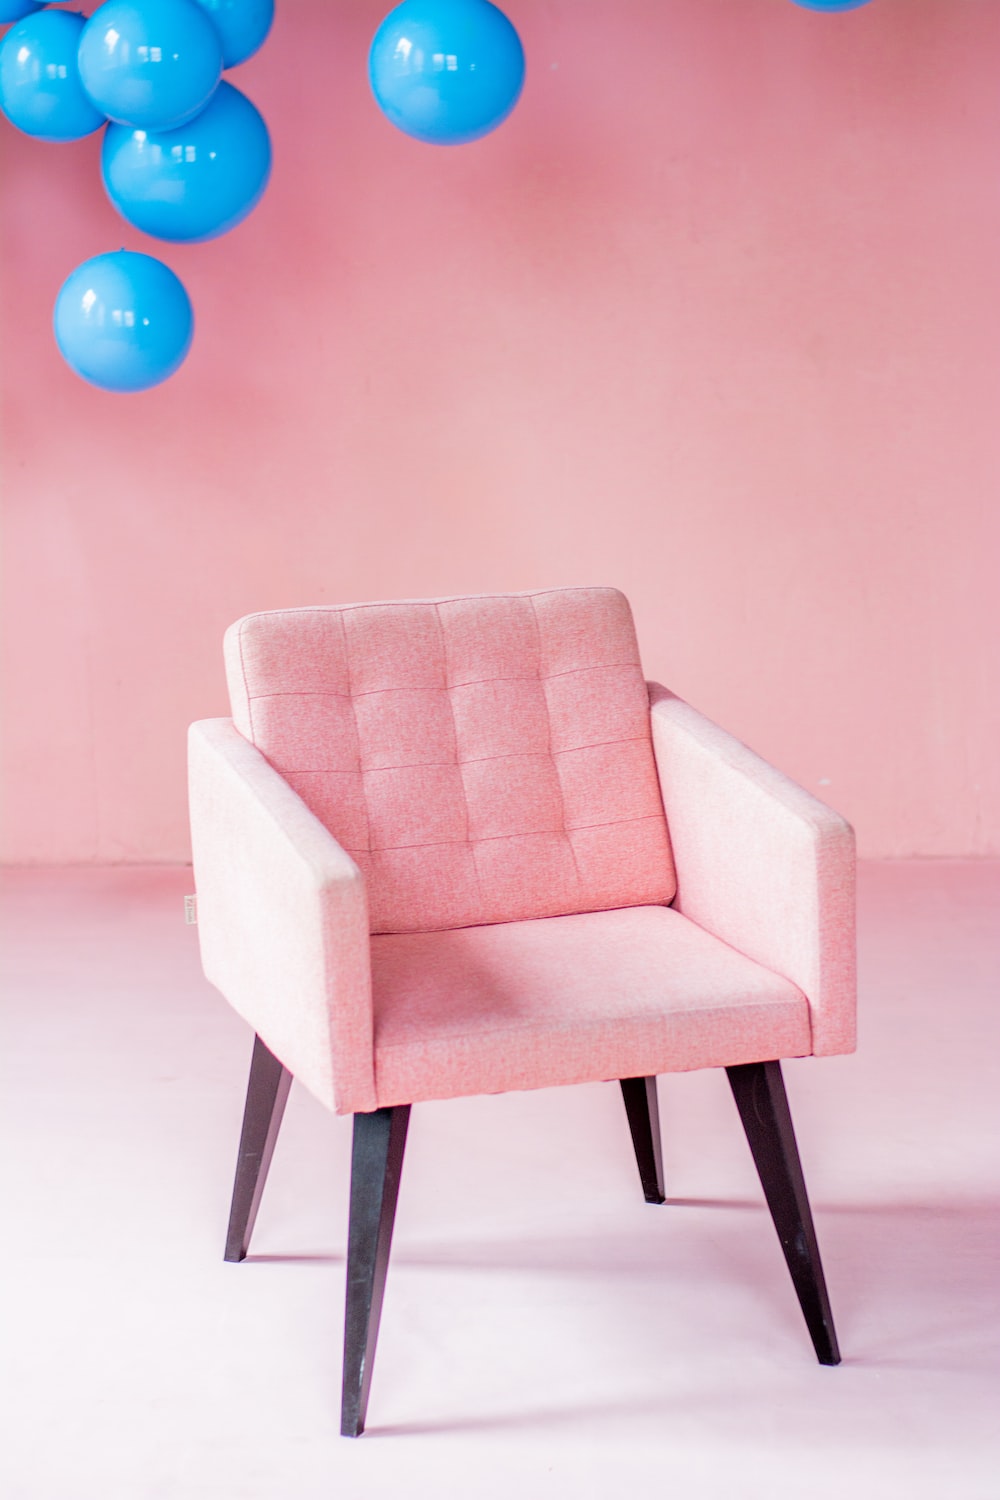 Chair Wallpapers